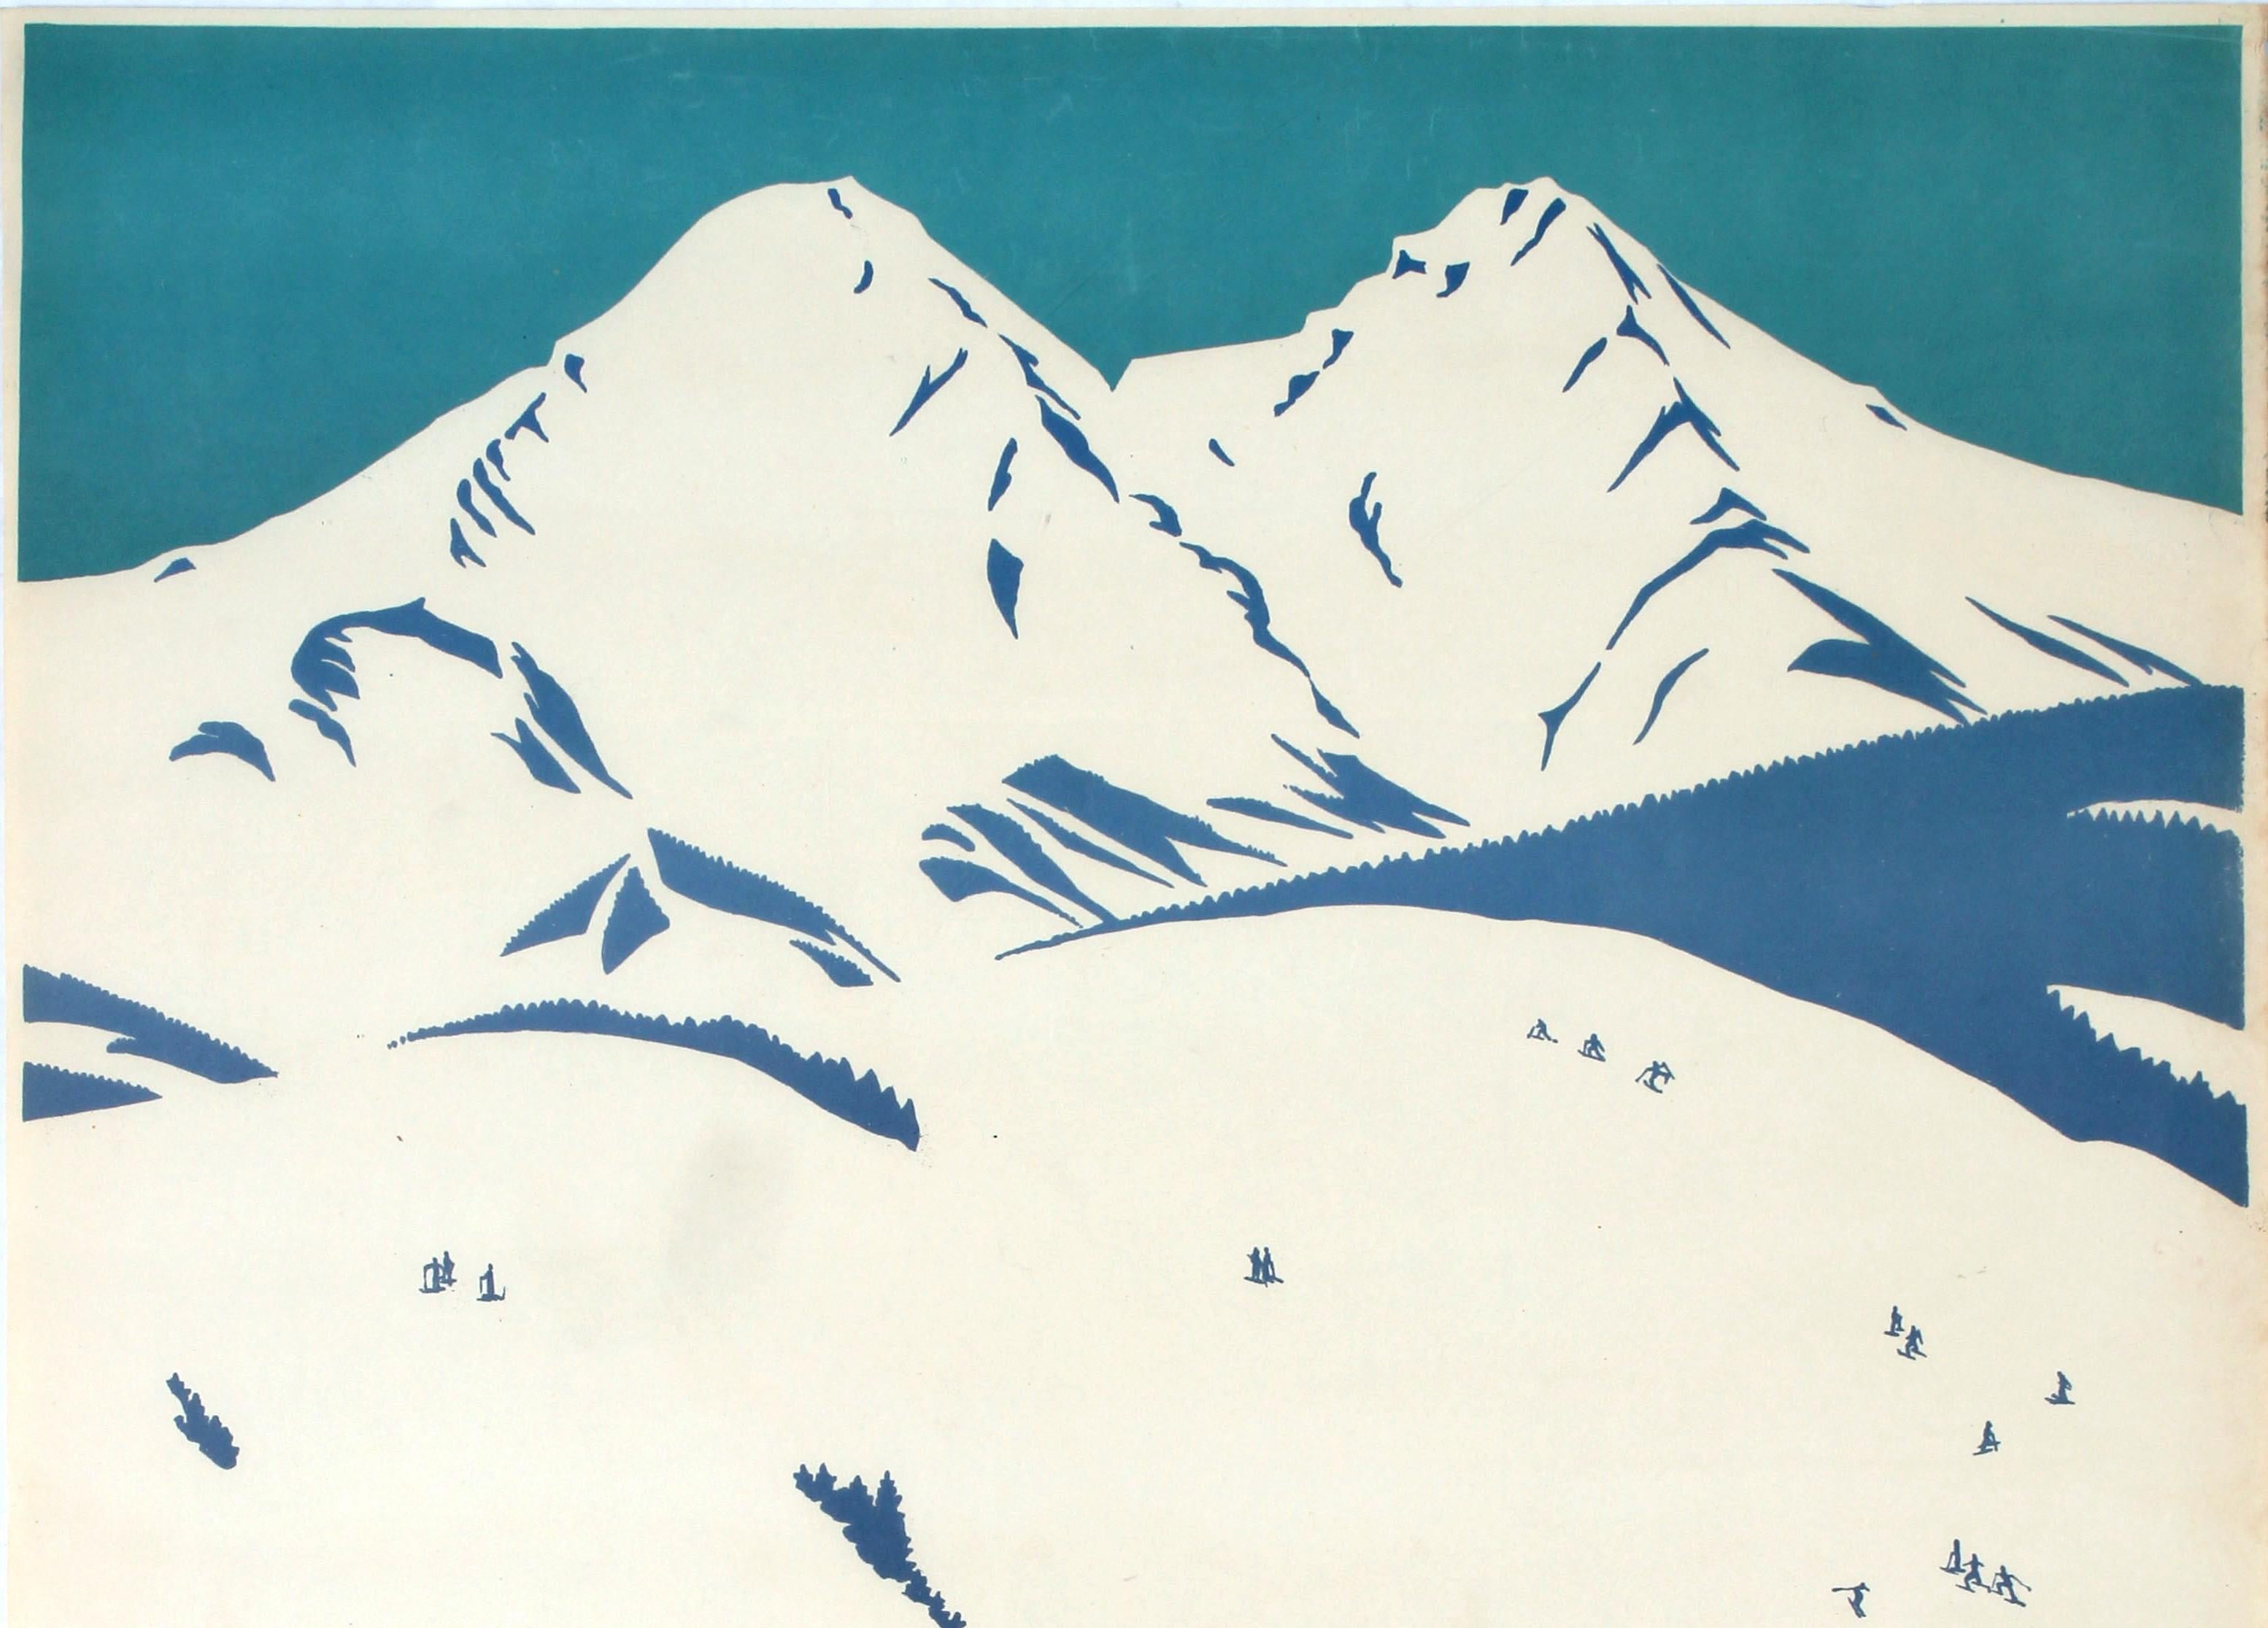 Original vintage poster for Hohe Tatra / High Tatras – 1000-1350m – Das ideale Wintersportgebiet / The Ideal Winter Sports Area. Stylized illustration by Neuzil showing a scenic view of a snowy Hohe Tatra valley with ladies dressed in traditional